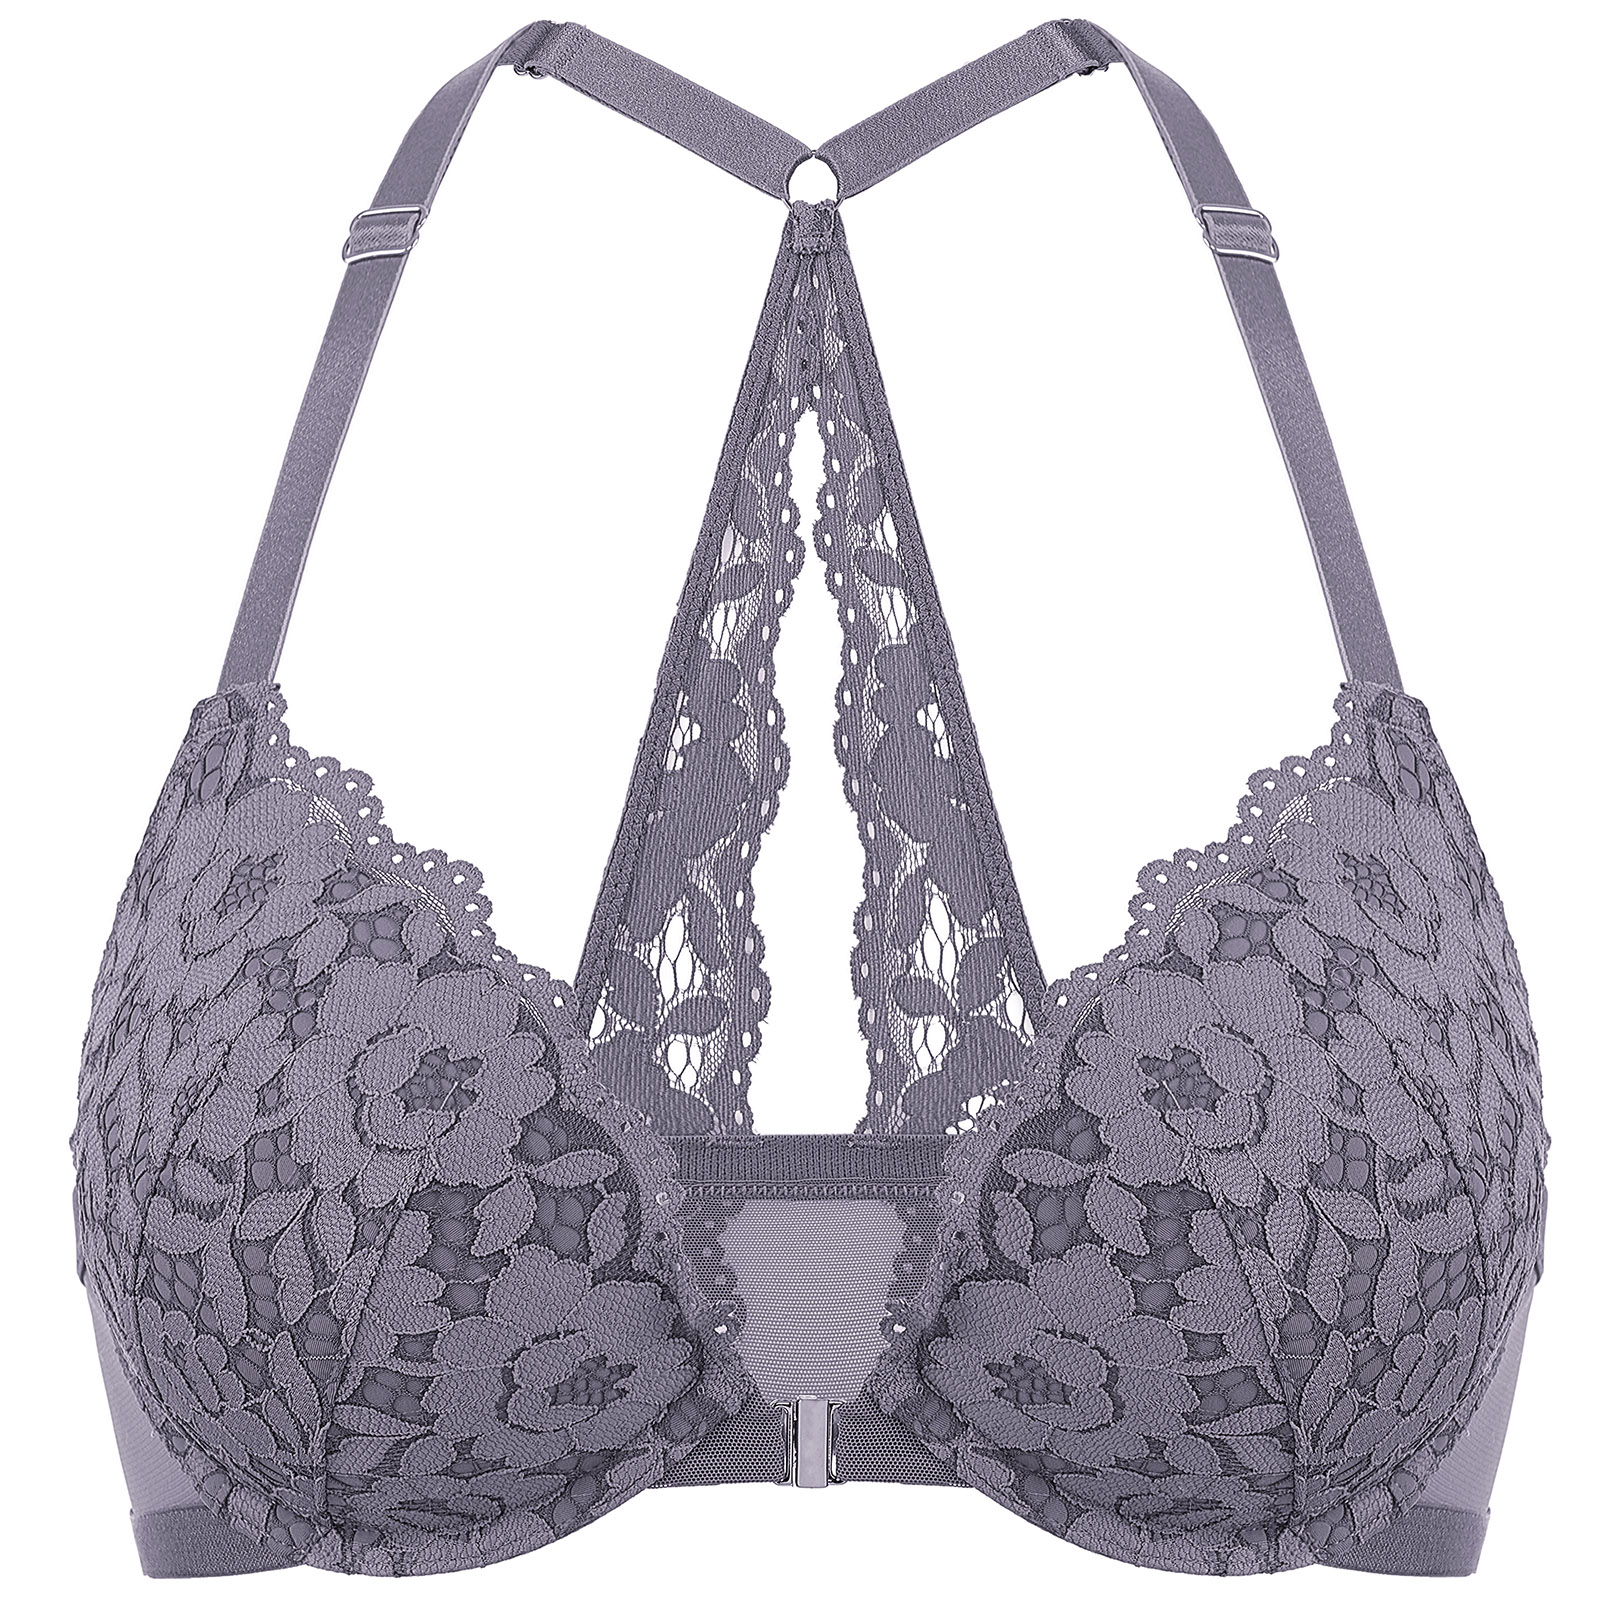 Women's Push Up Bra Front Closure Bras Lace Padded Underwire